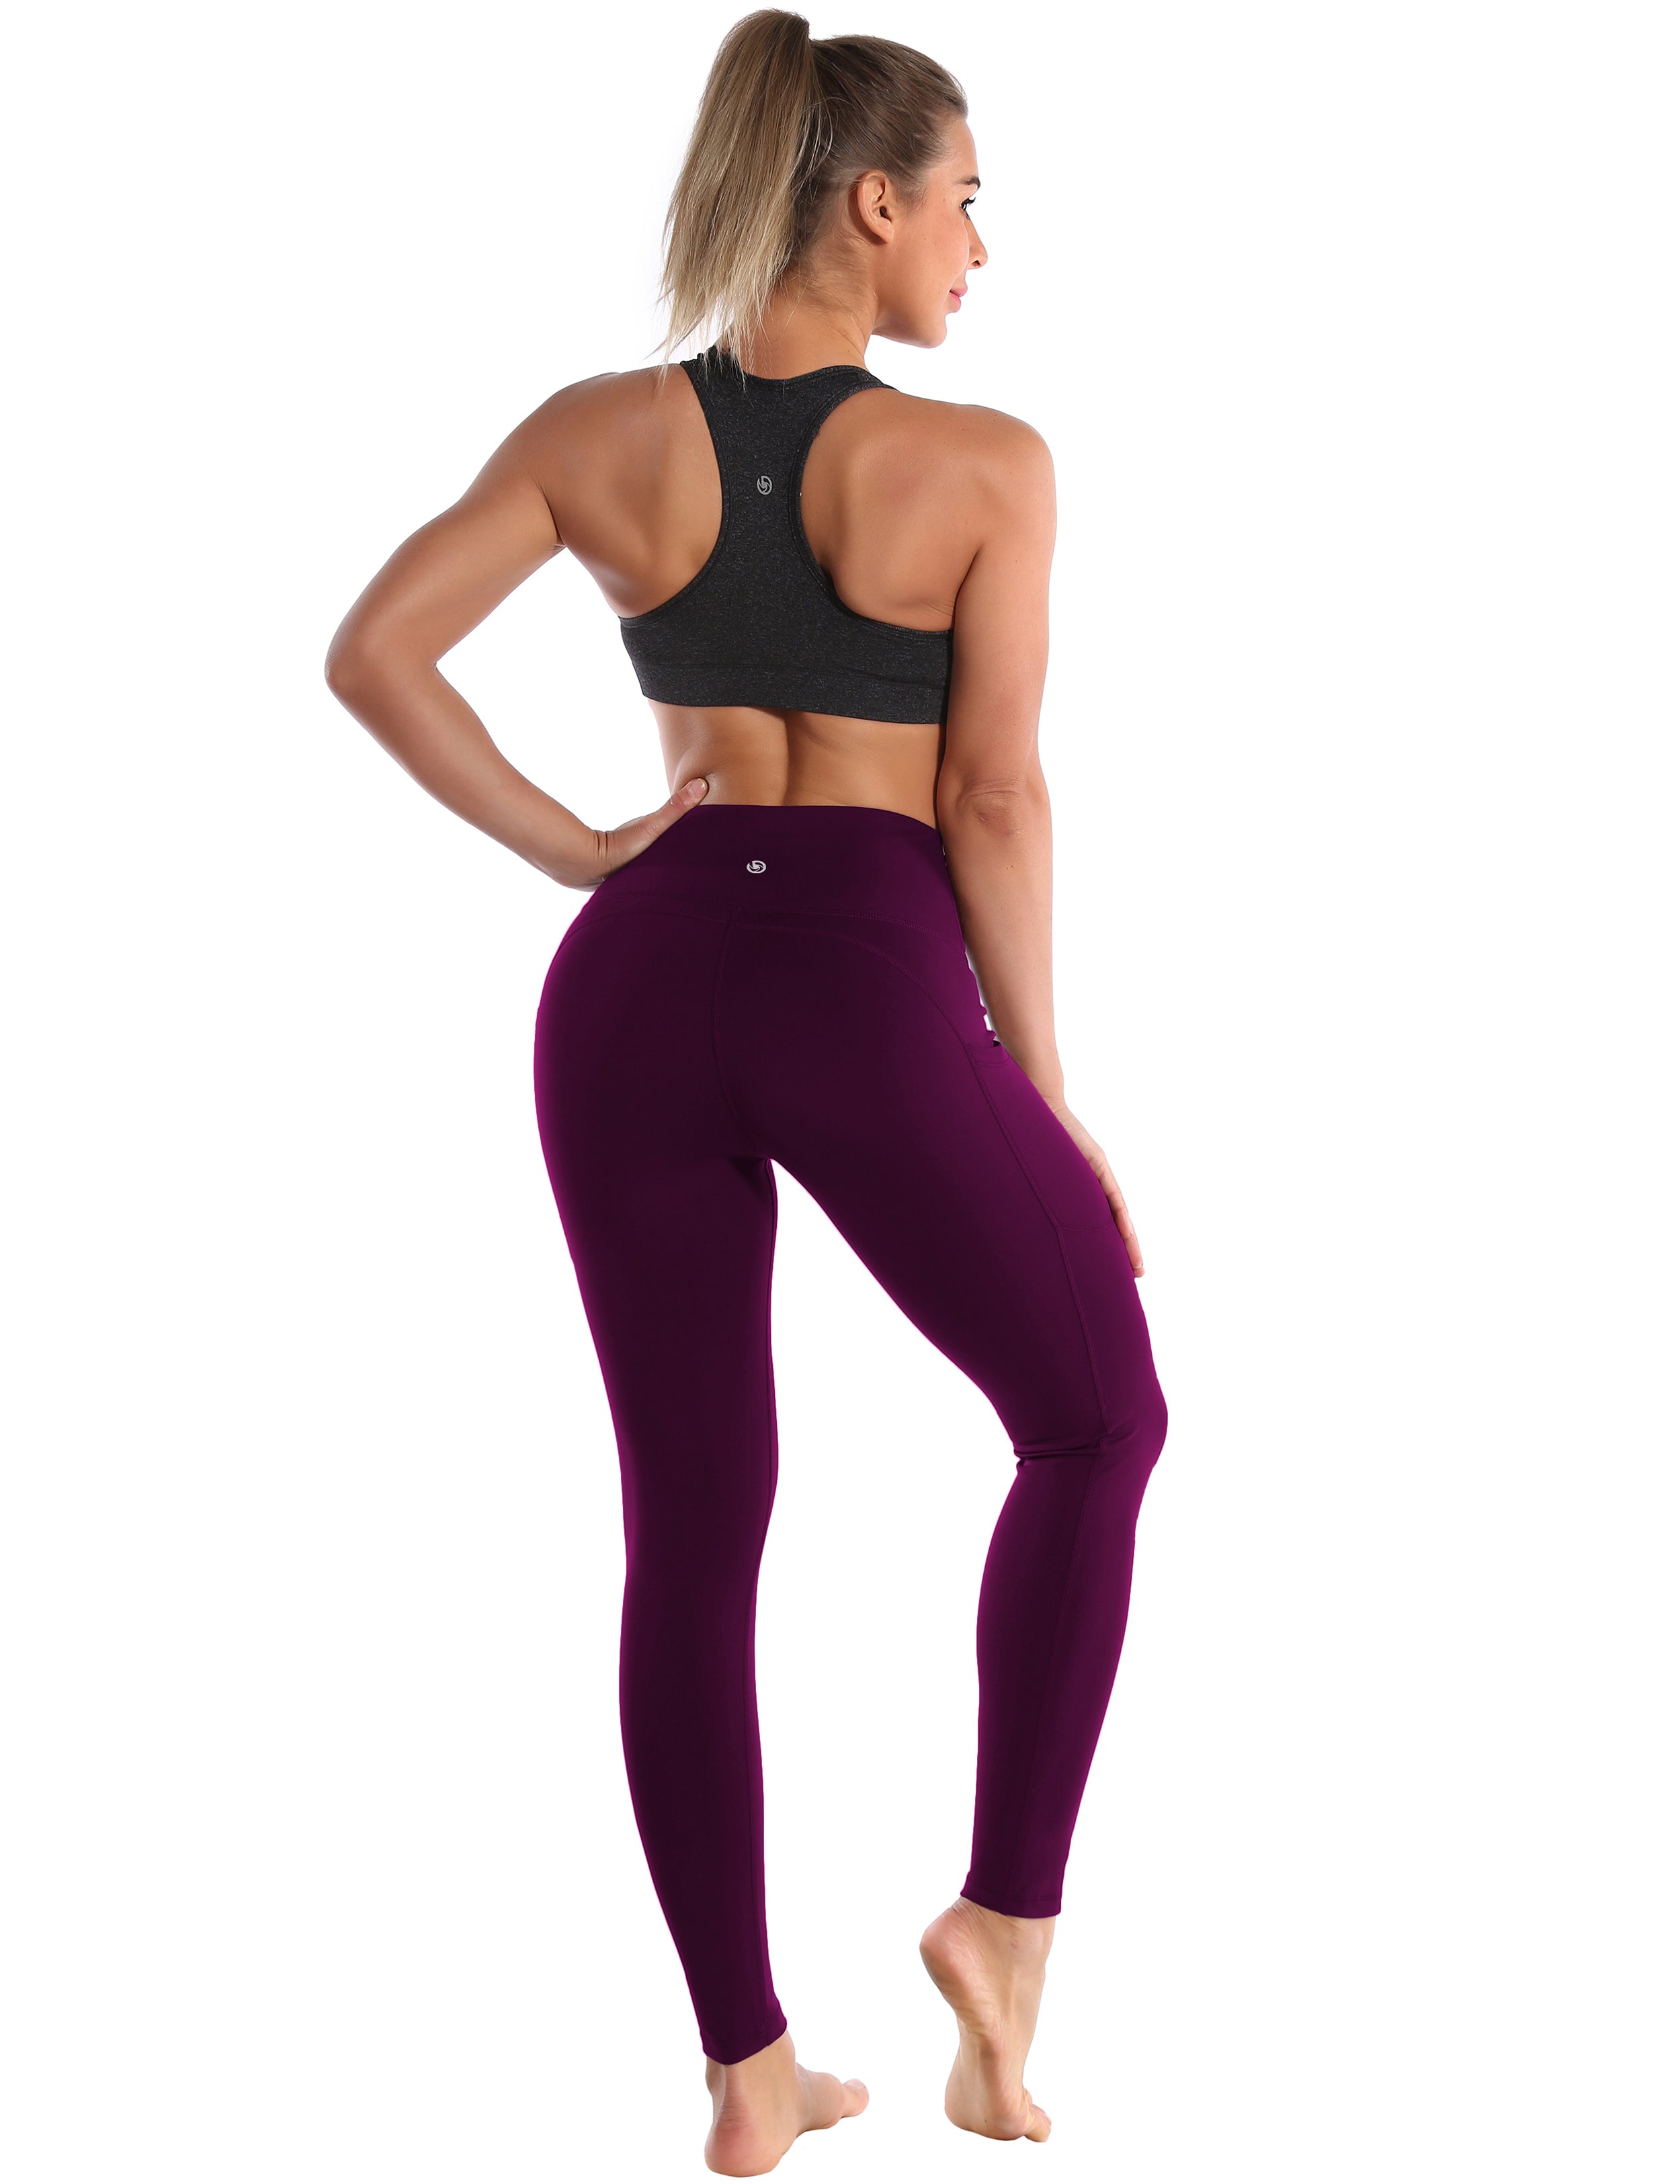 Hip Line Side Pockets Jogging Pants plum Sexy Hip Line Side Pockets 75%Nylon/25%Spandex Fabric doesn't attract lint easily 4-way stretch No see-through Moisture-wicking Tummy control Inner pocket Two lengths